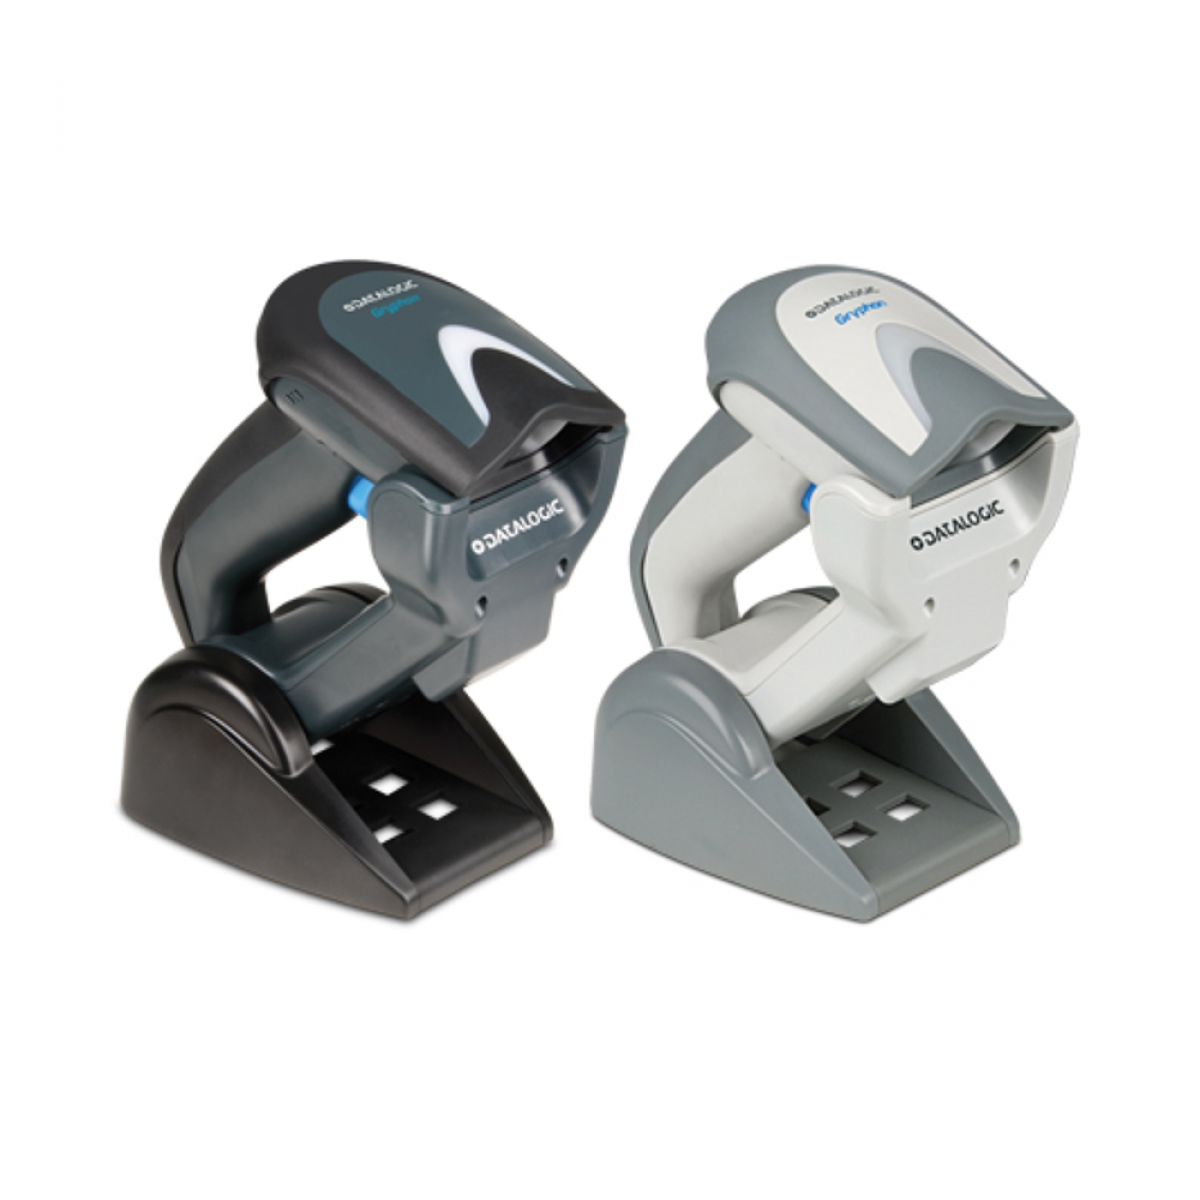 Datalogic GBT4100 Wireless Linear scanners with cradles